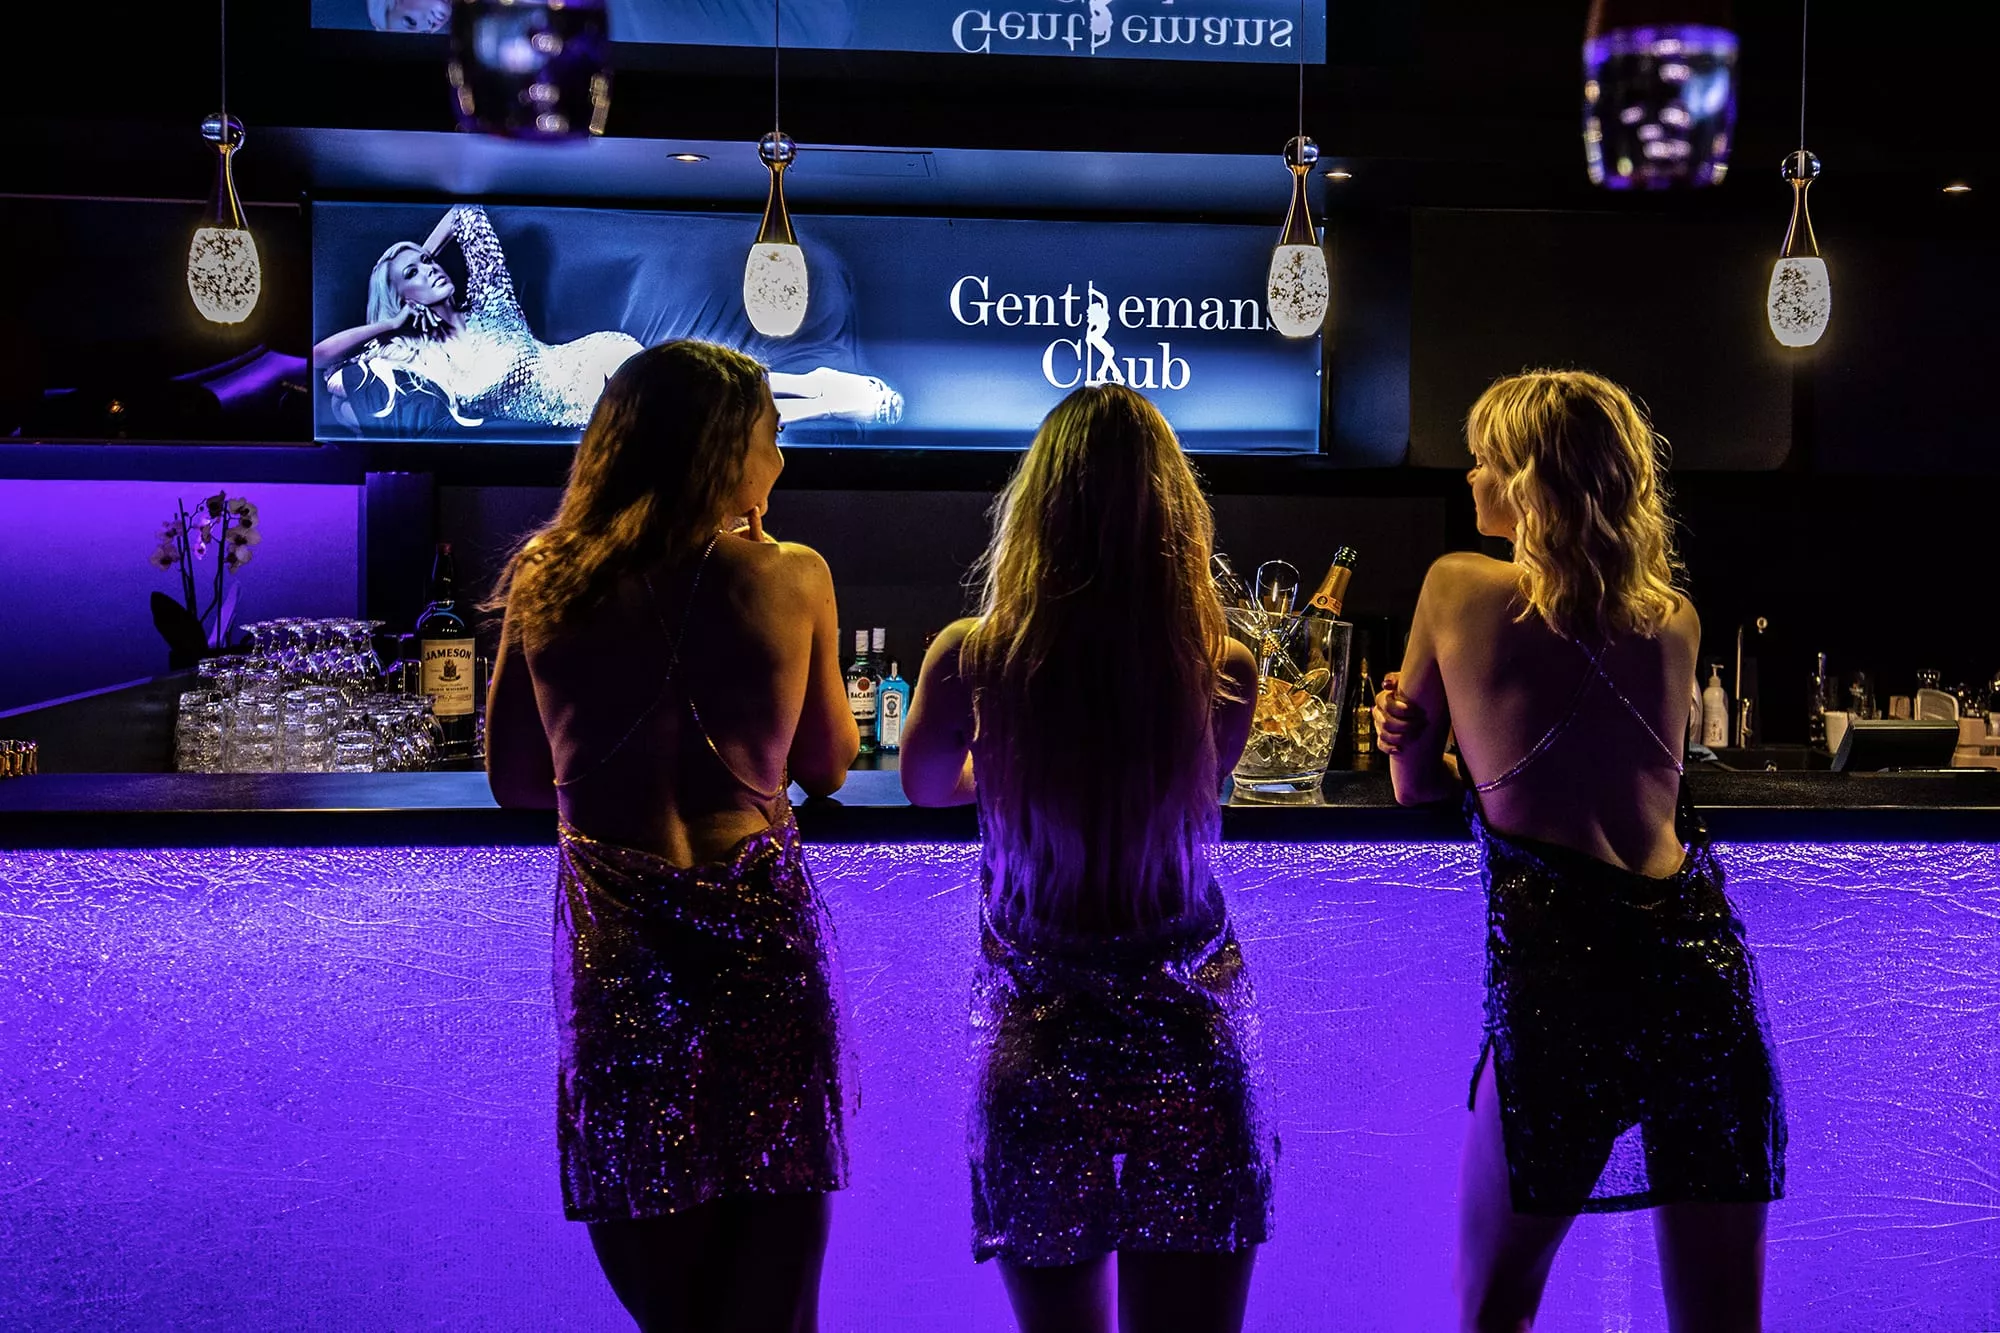 Gentlemans Club in Finland, Europe  - Rated 0.8